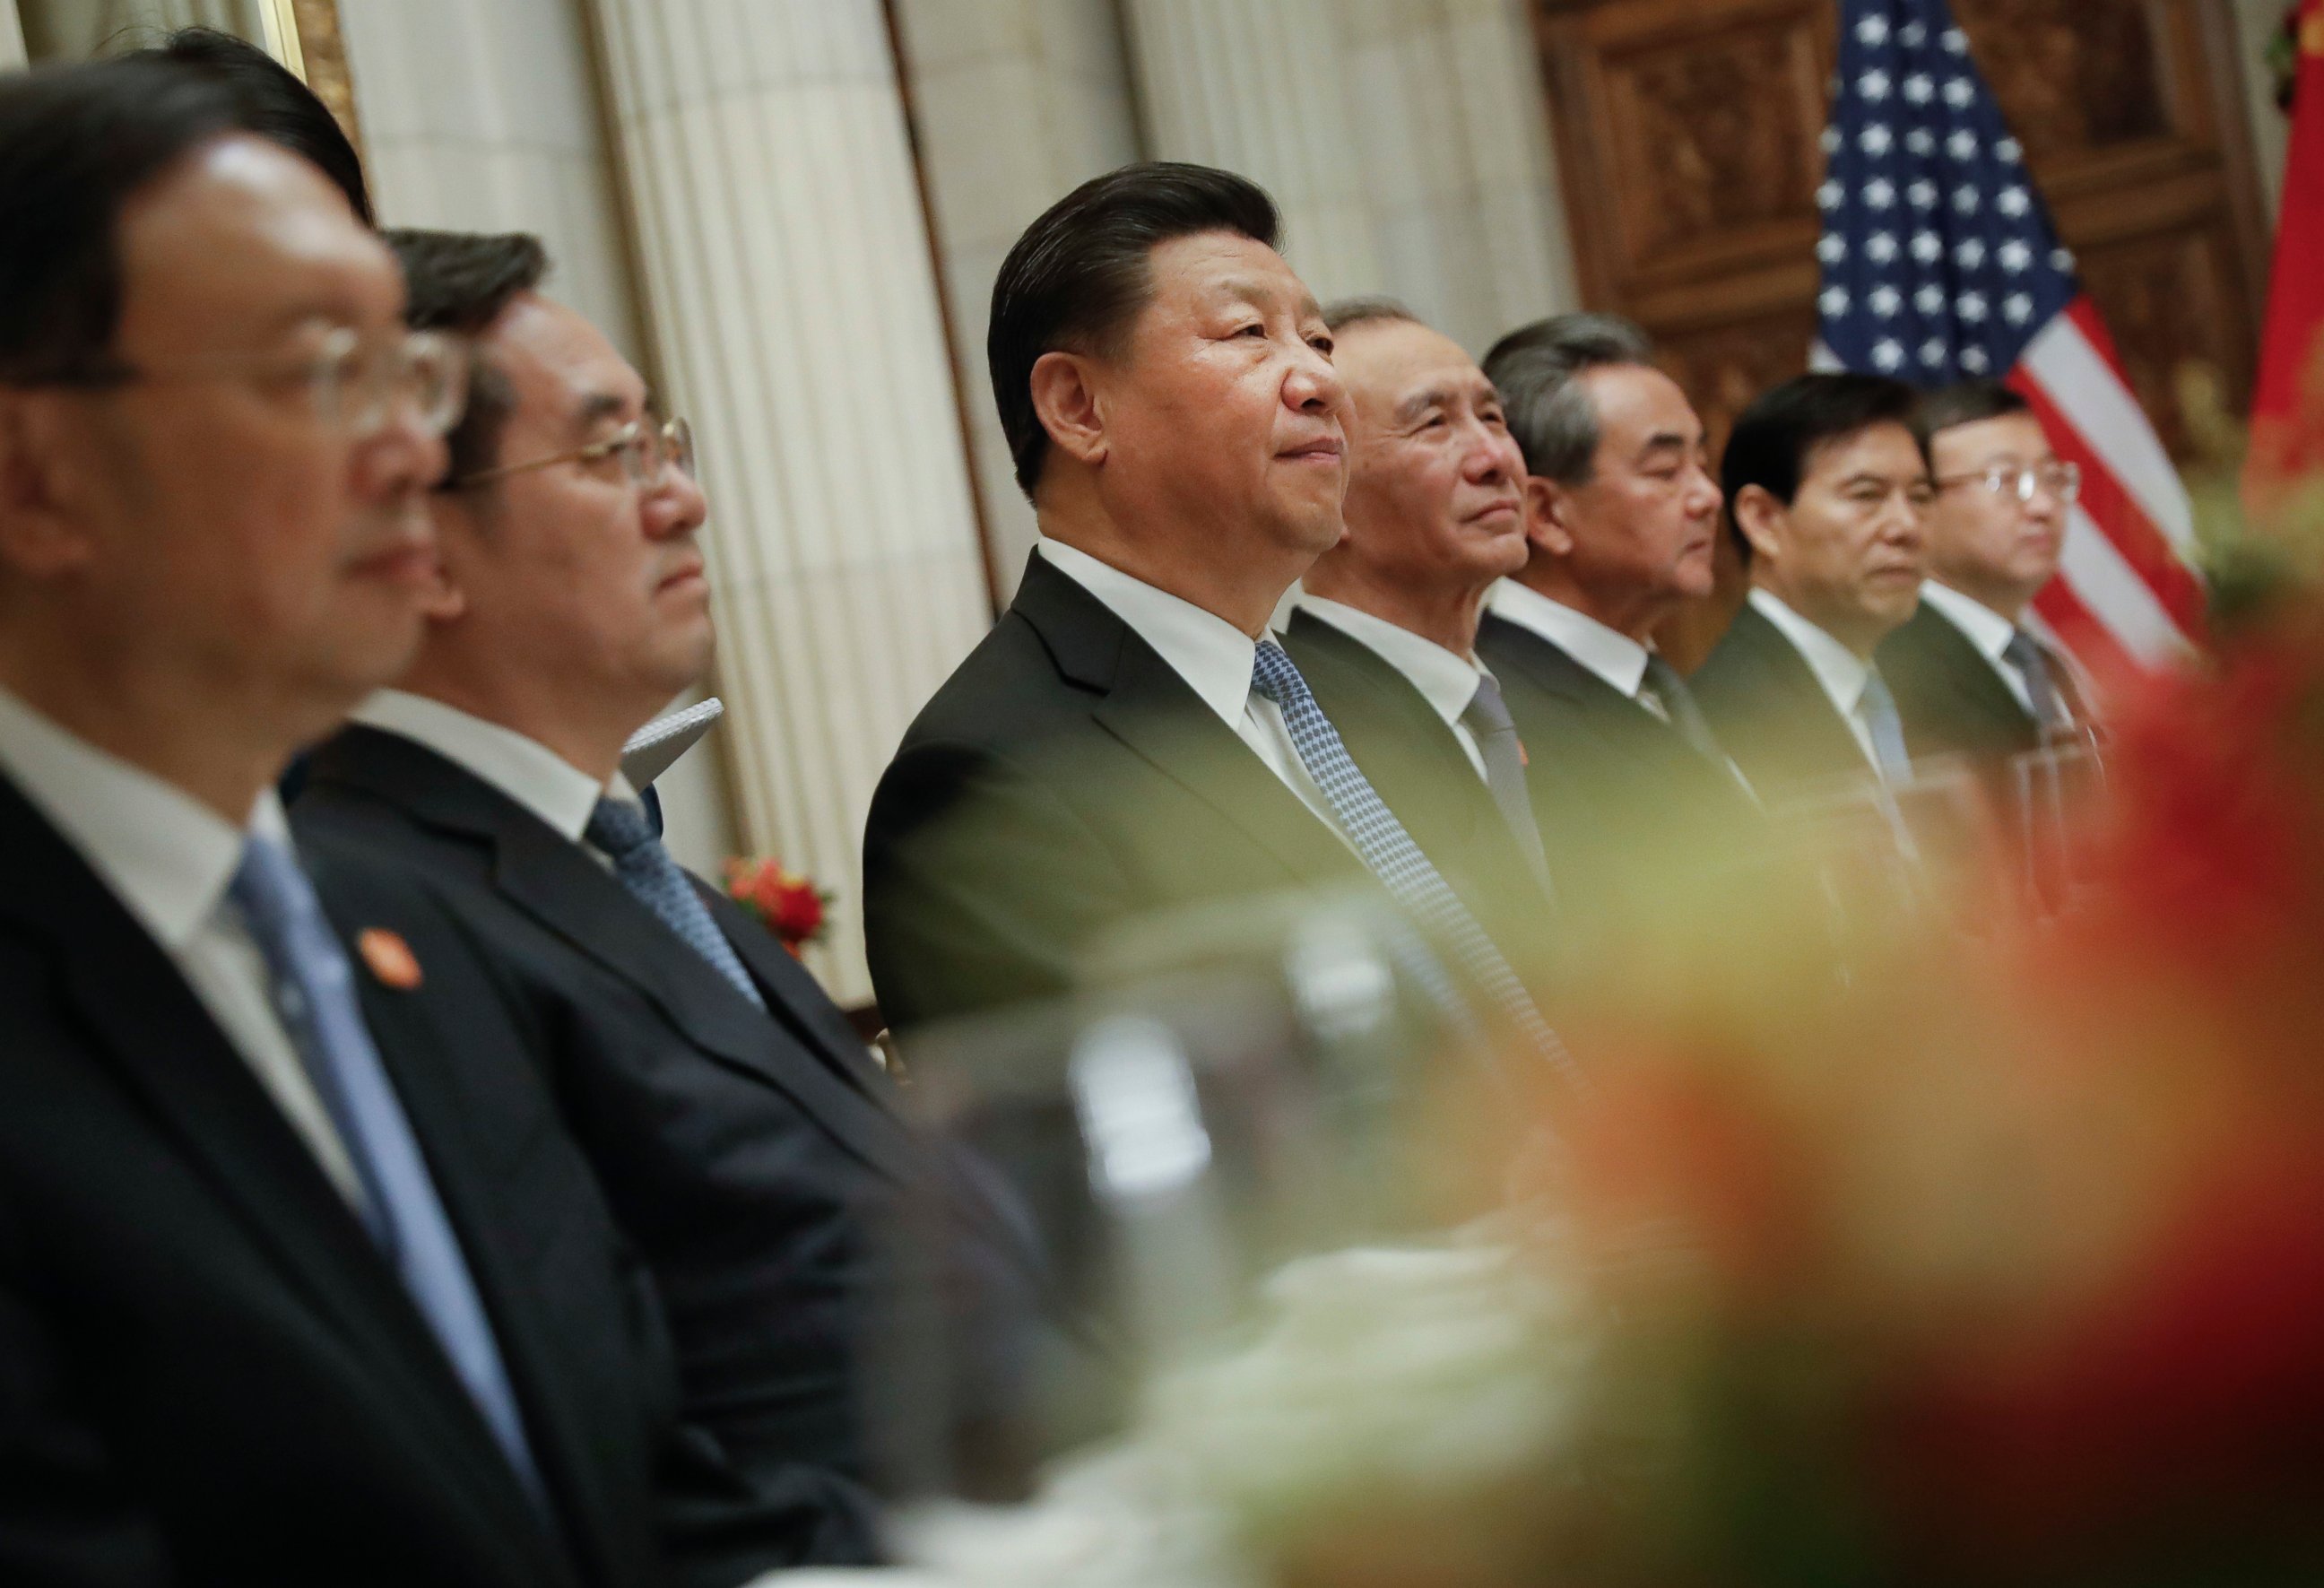 PHOTO: China's President Xi Jinping, center, and members of his official delegation, listen to President Donald Trump speak during their bilateral meeting at the G20 Summit, Saturday, Dec. 1, 2018 in Buenos Aires, Argentina.